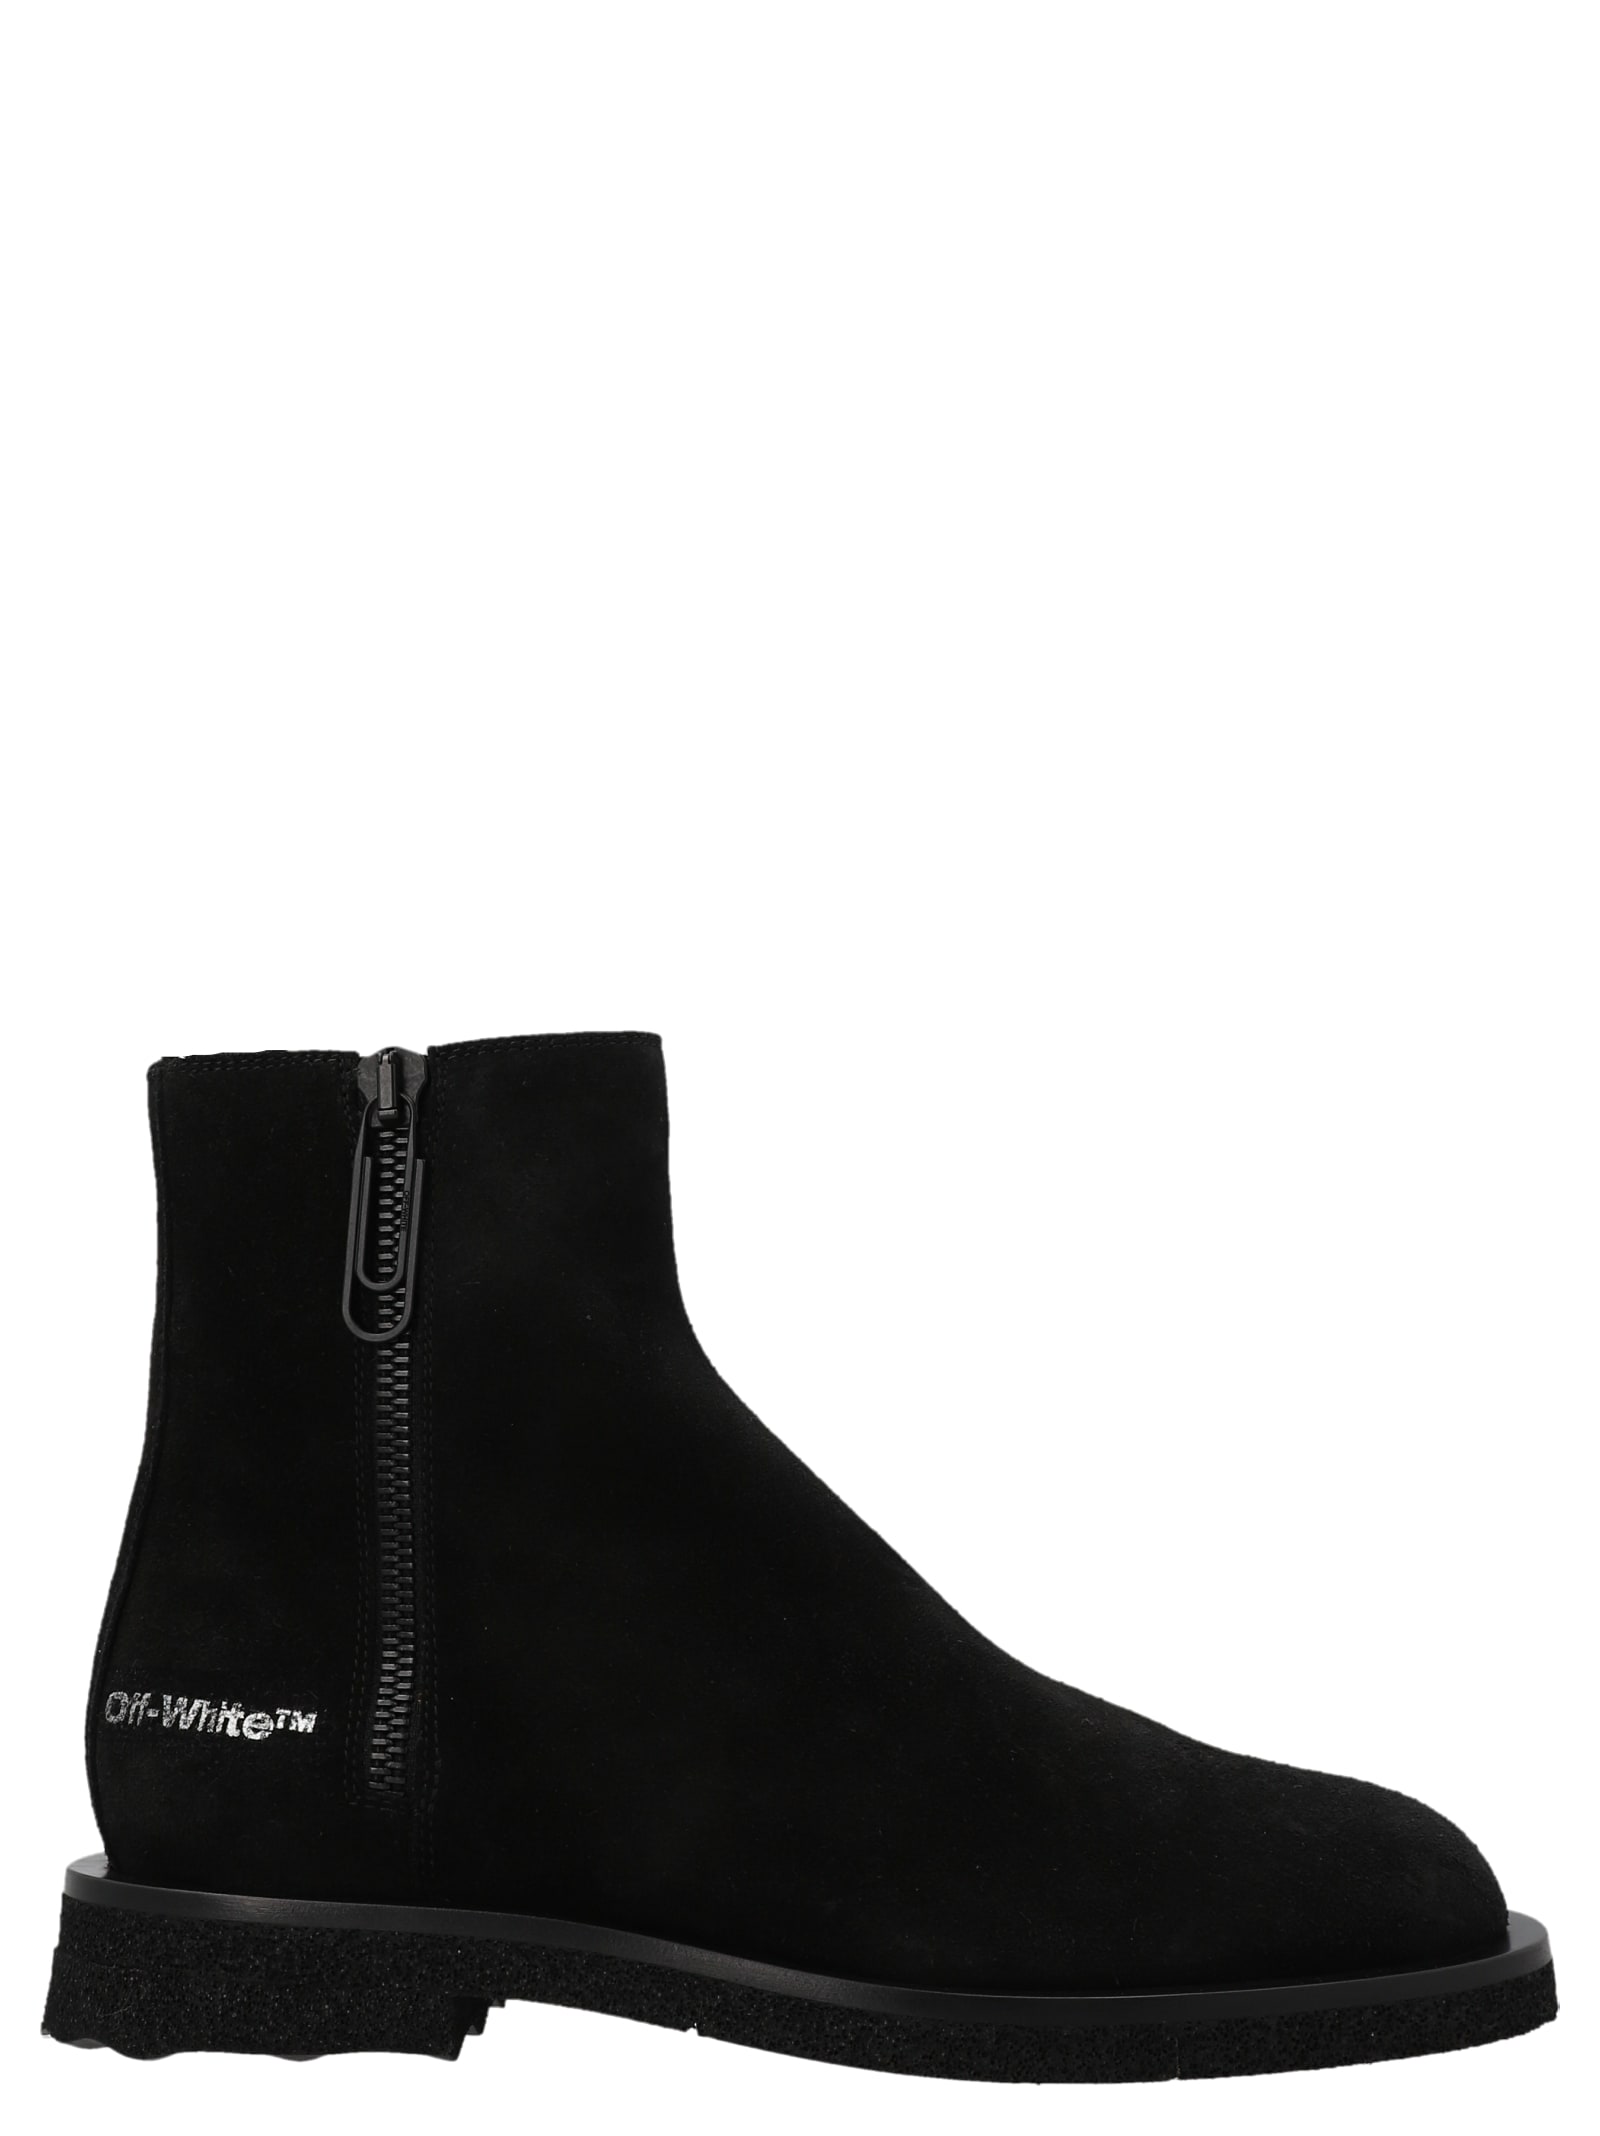 Off-White spongesole Ankle Boots